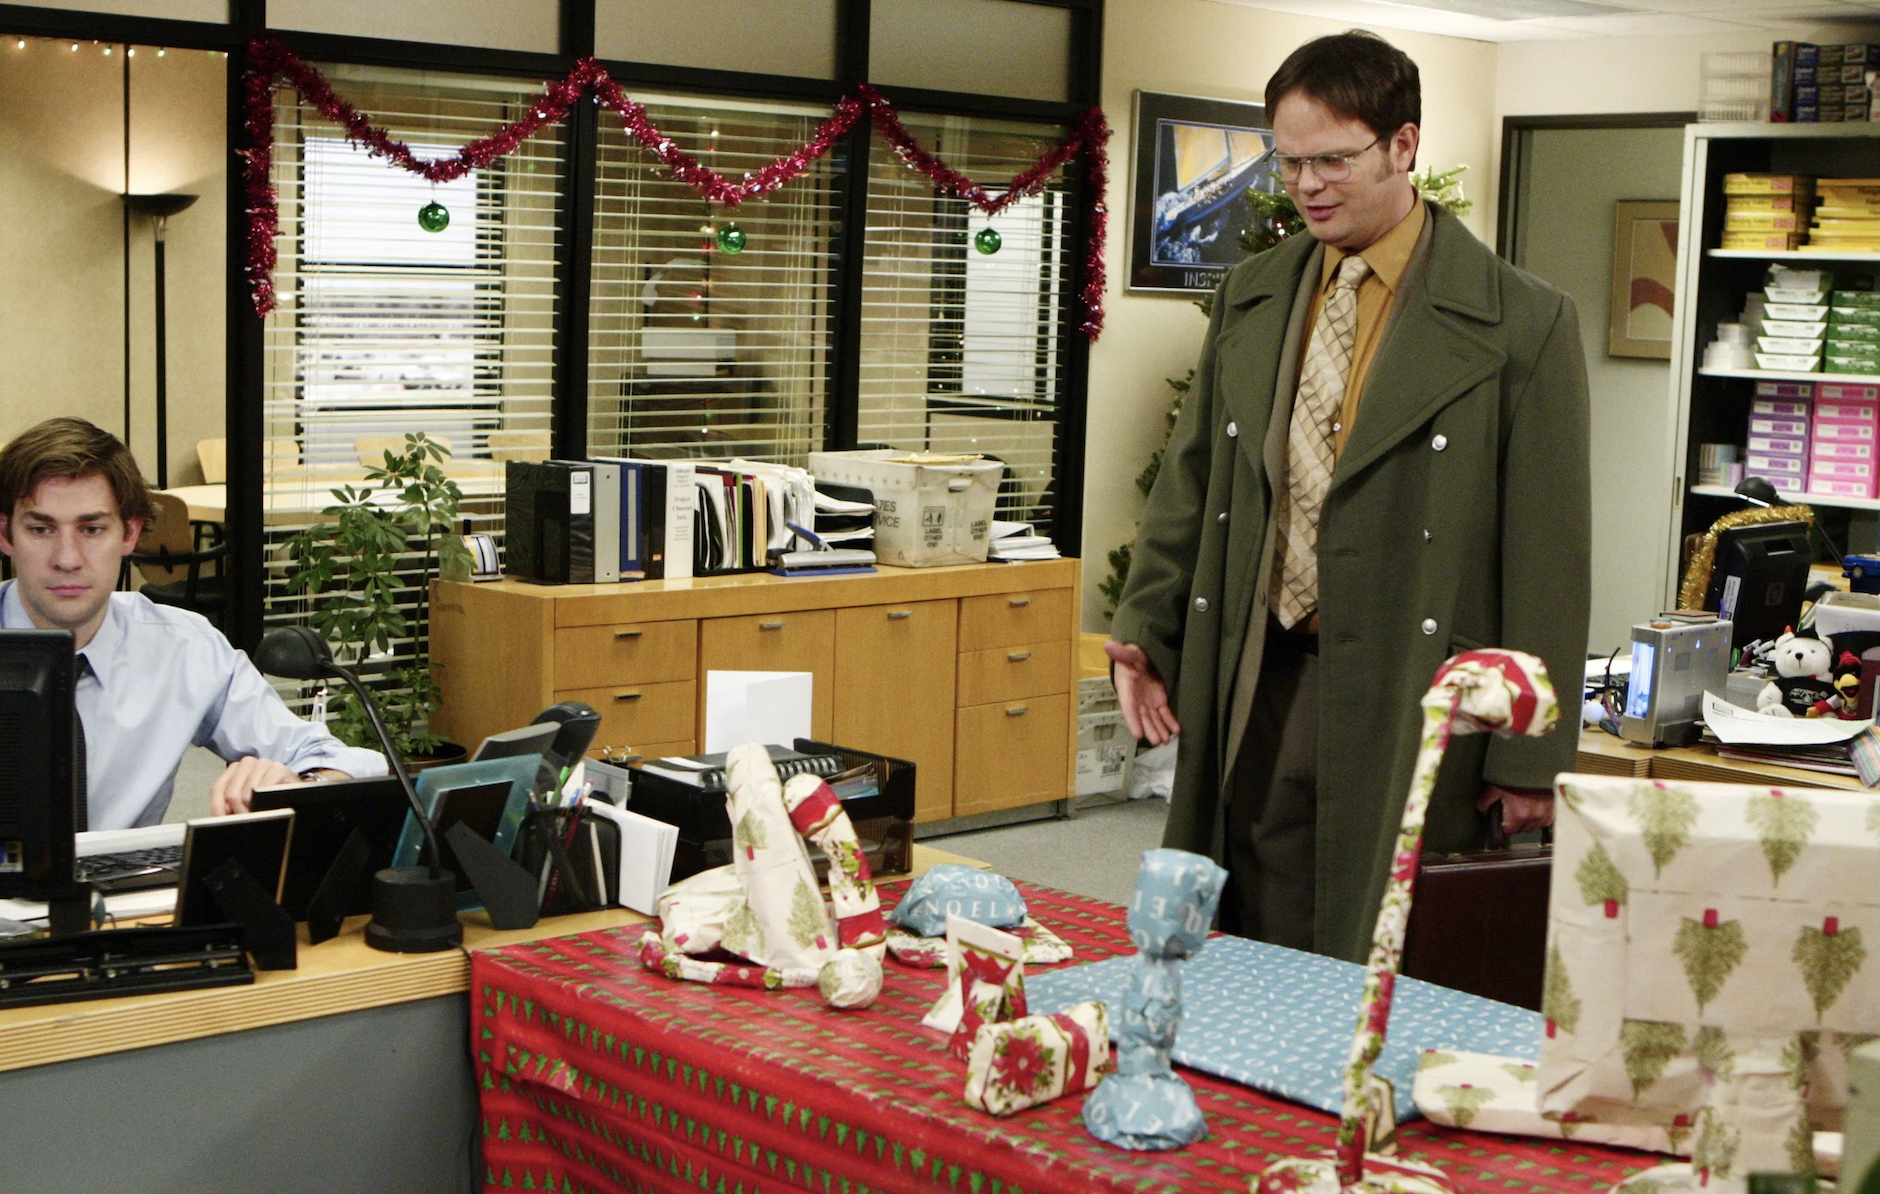 Rainn Wilson as Dwight Schrute looking at his desk that has been wrapped up like a present